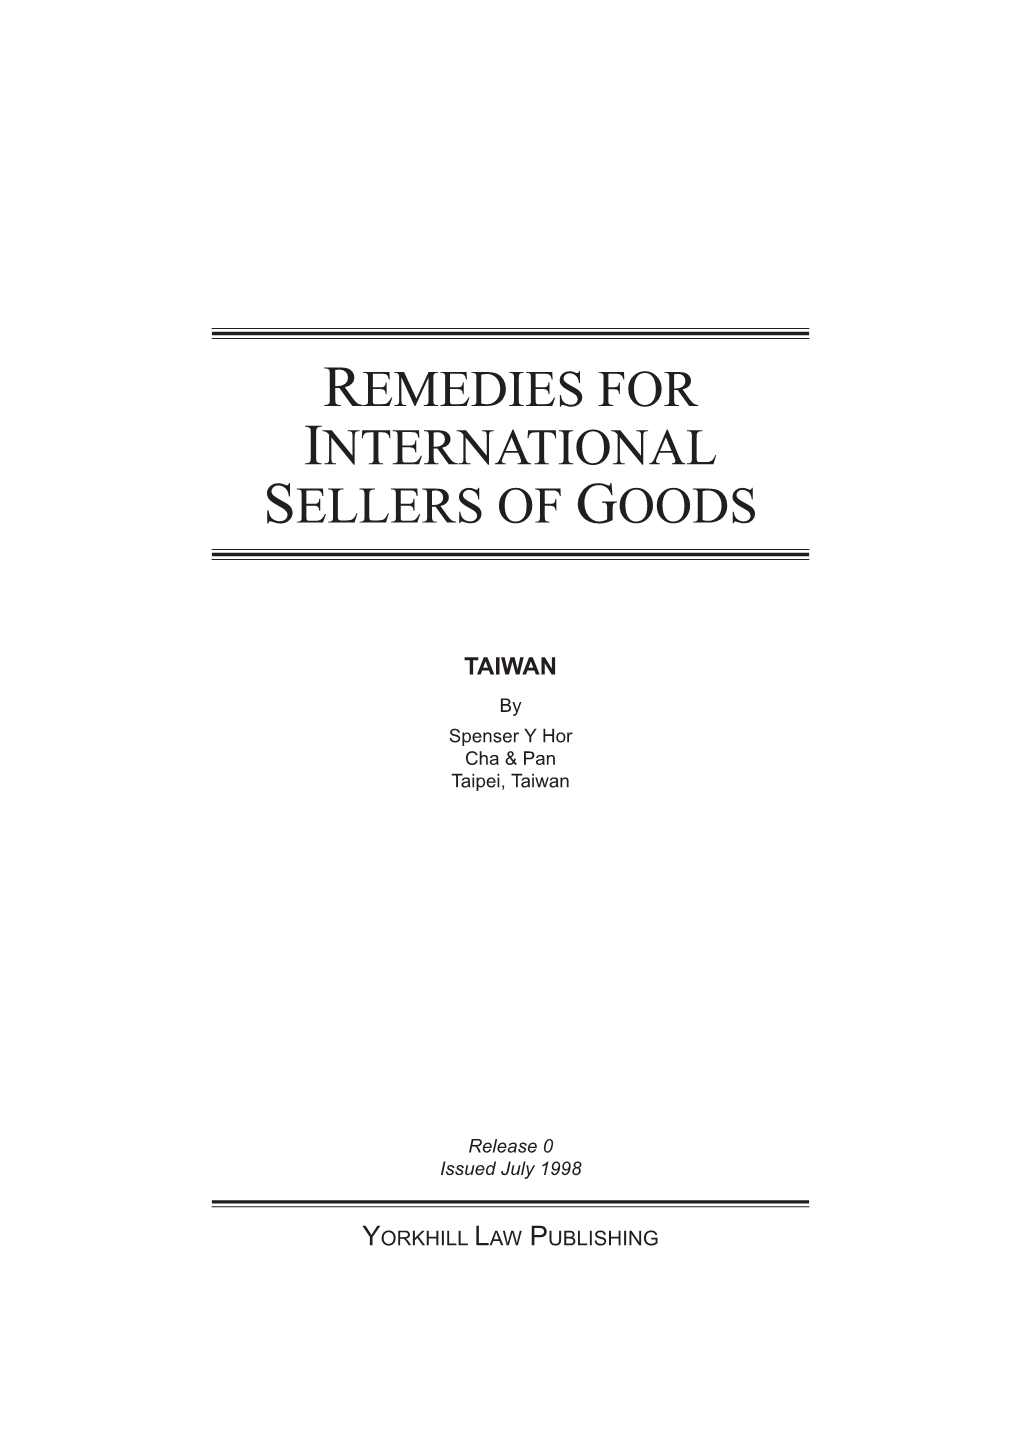 Remedies for International Sellers of Goods in Taiwan